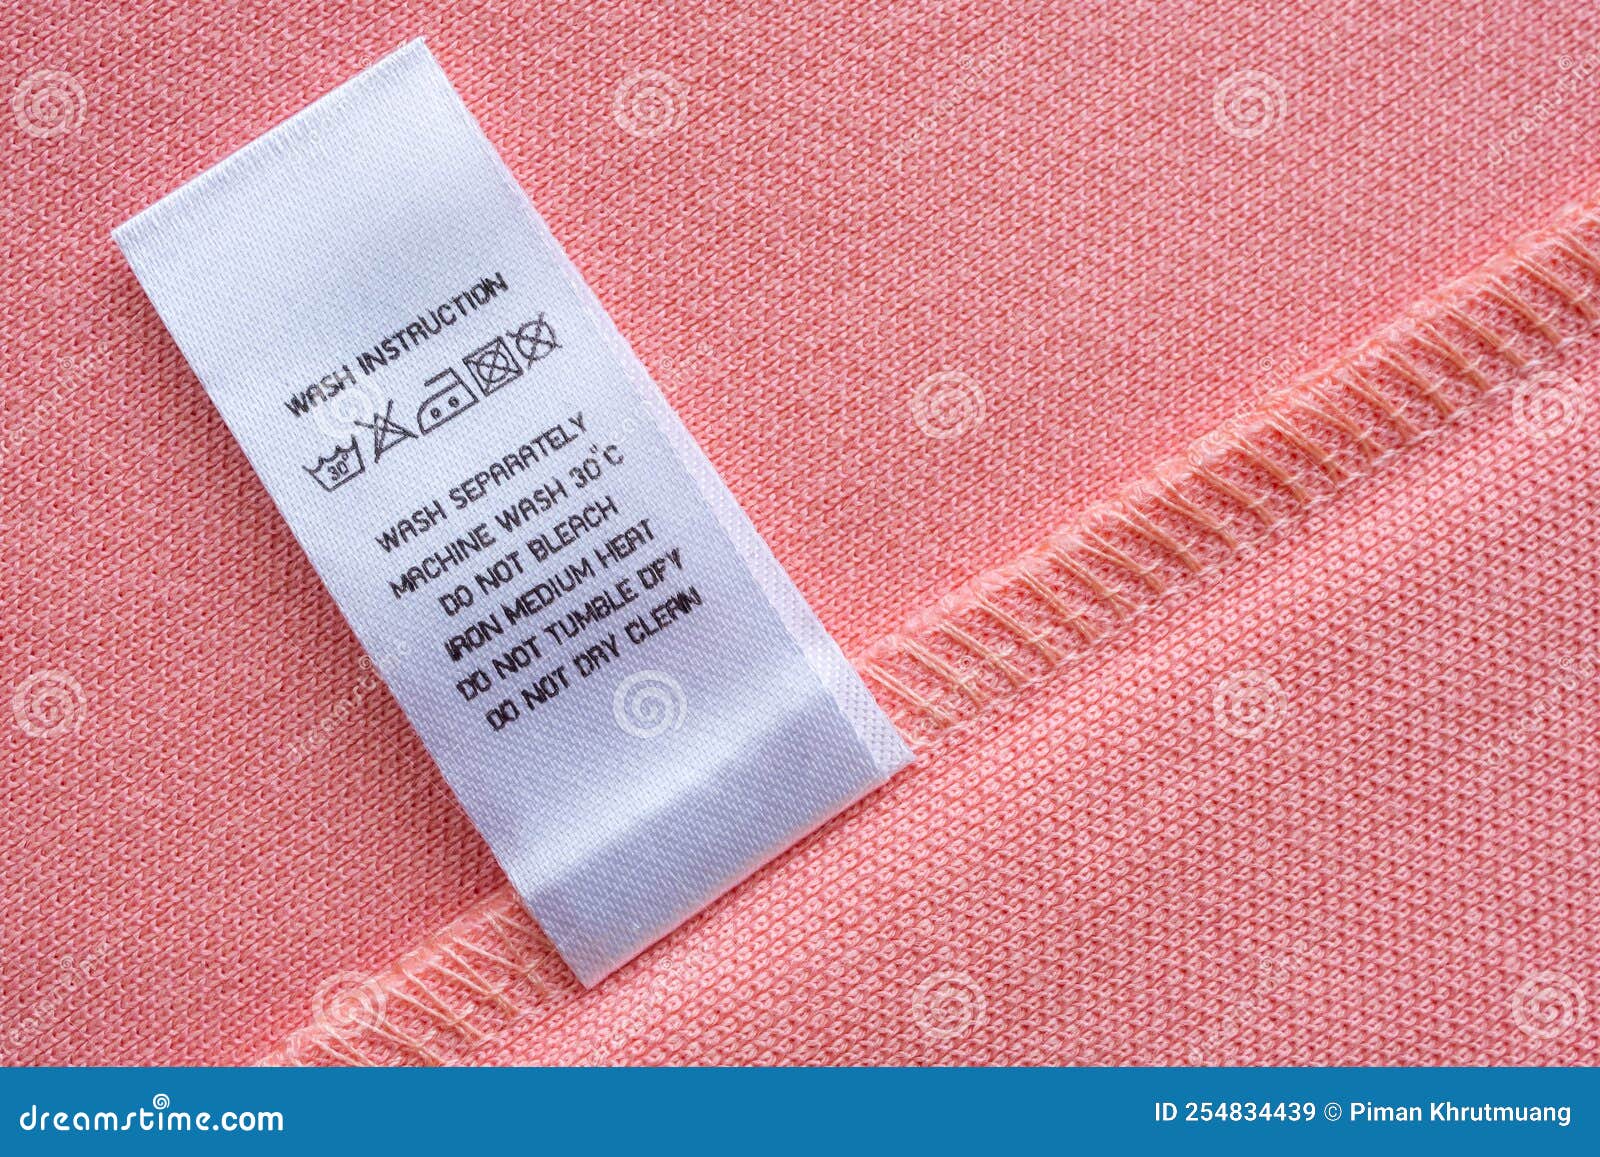 White Laundry Care Washing Instructions Clothes Label on Pink Cotton ...